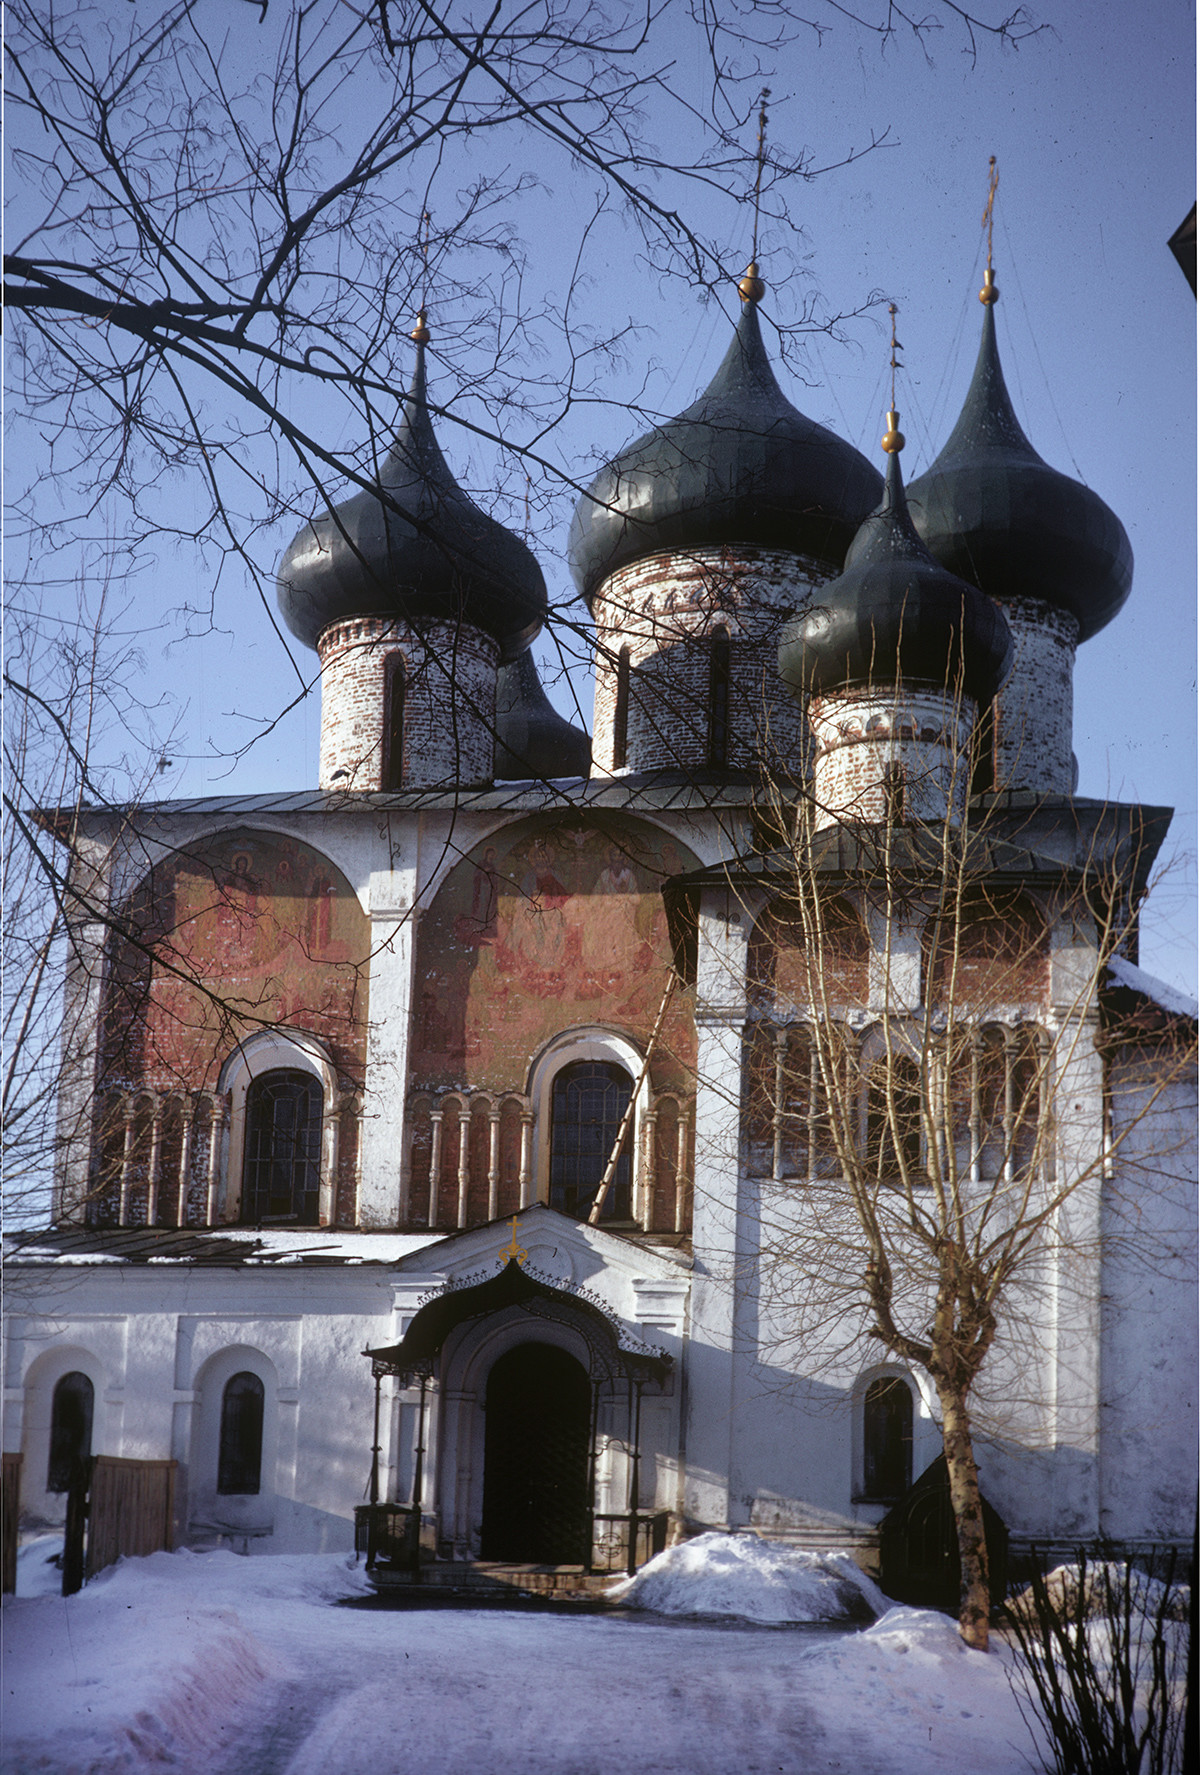 Savior-St. Evfimy Monastery. Cathedral of the Transfiguration of the Savior, south facade with remnants of frescoes (subsequently whitewashed). Right foreground: early 16th-century Chapel of St. Evfimy. March 5, 1972